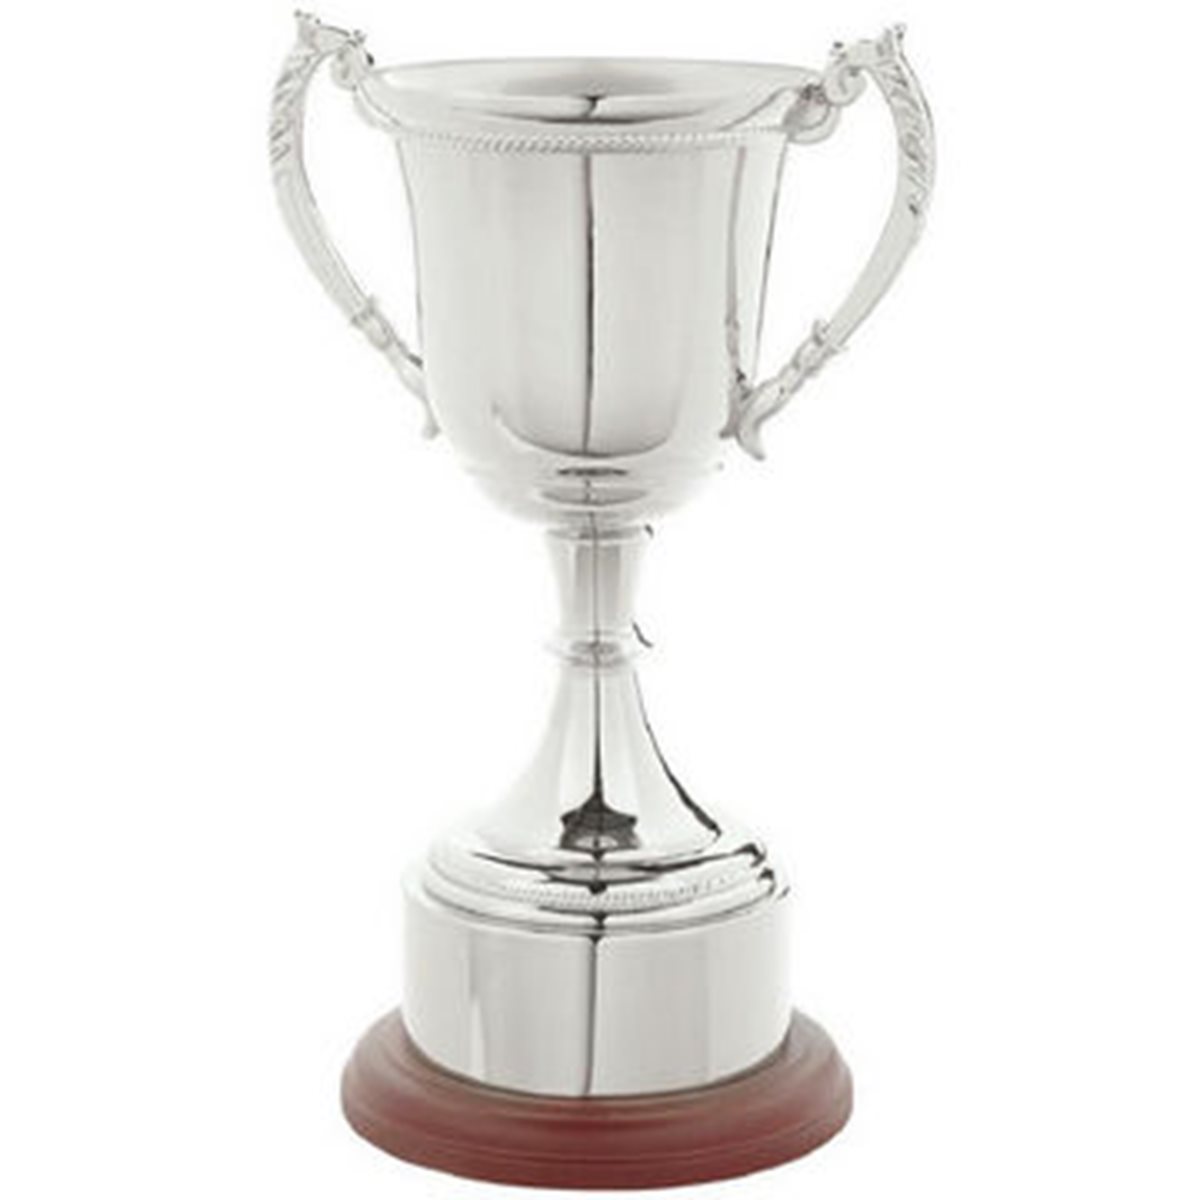 Silver Nickel Plated Cup on Round Wooden Base SV810